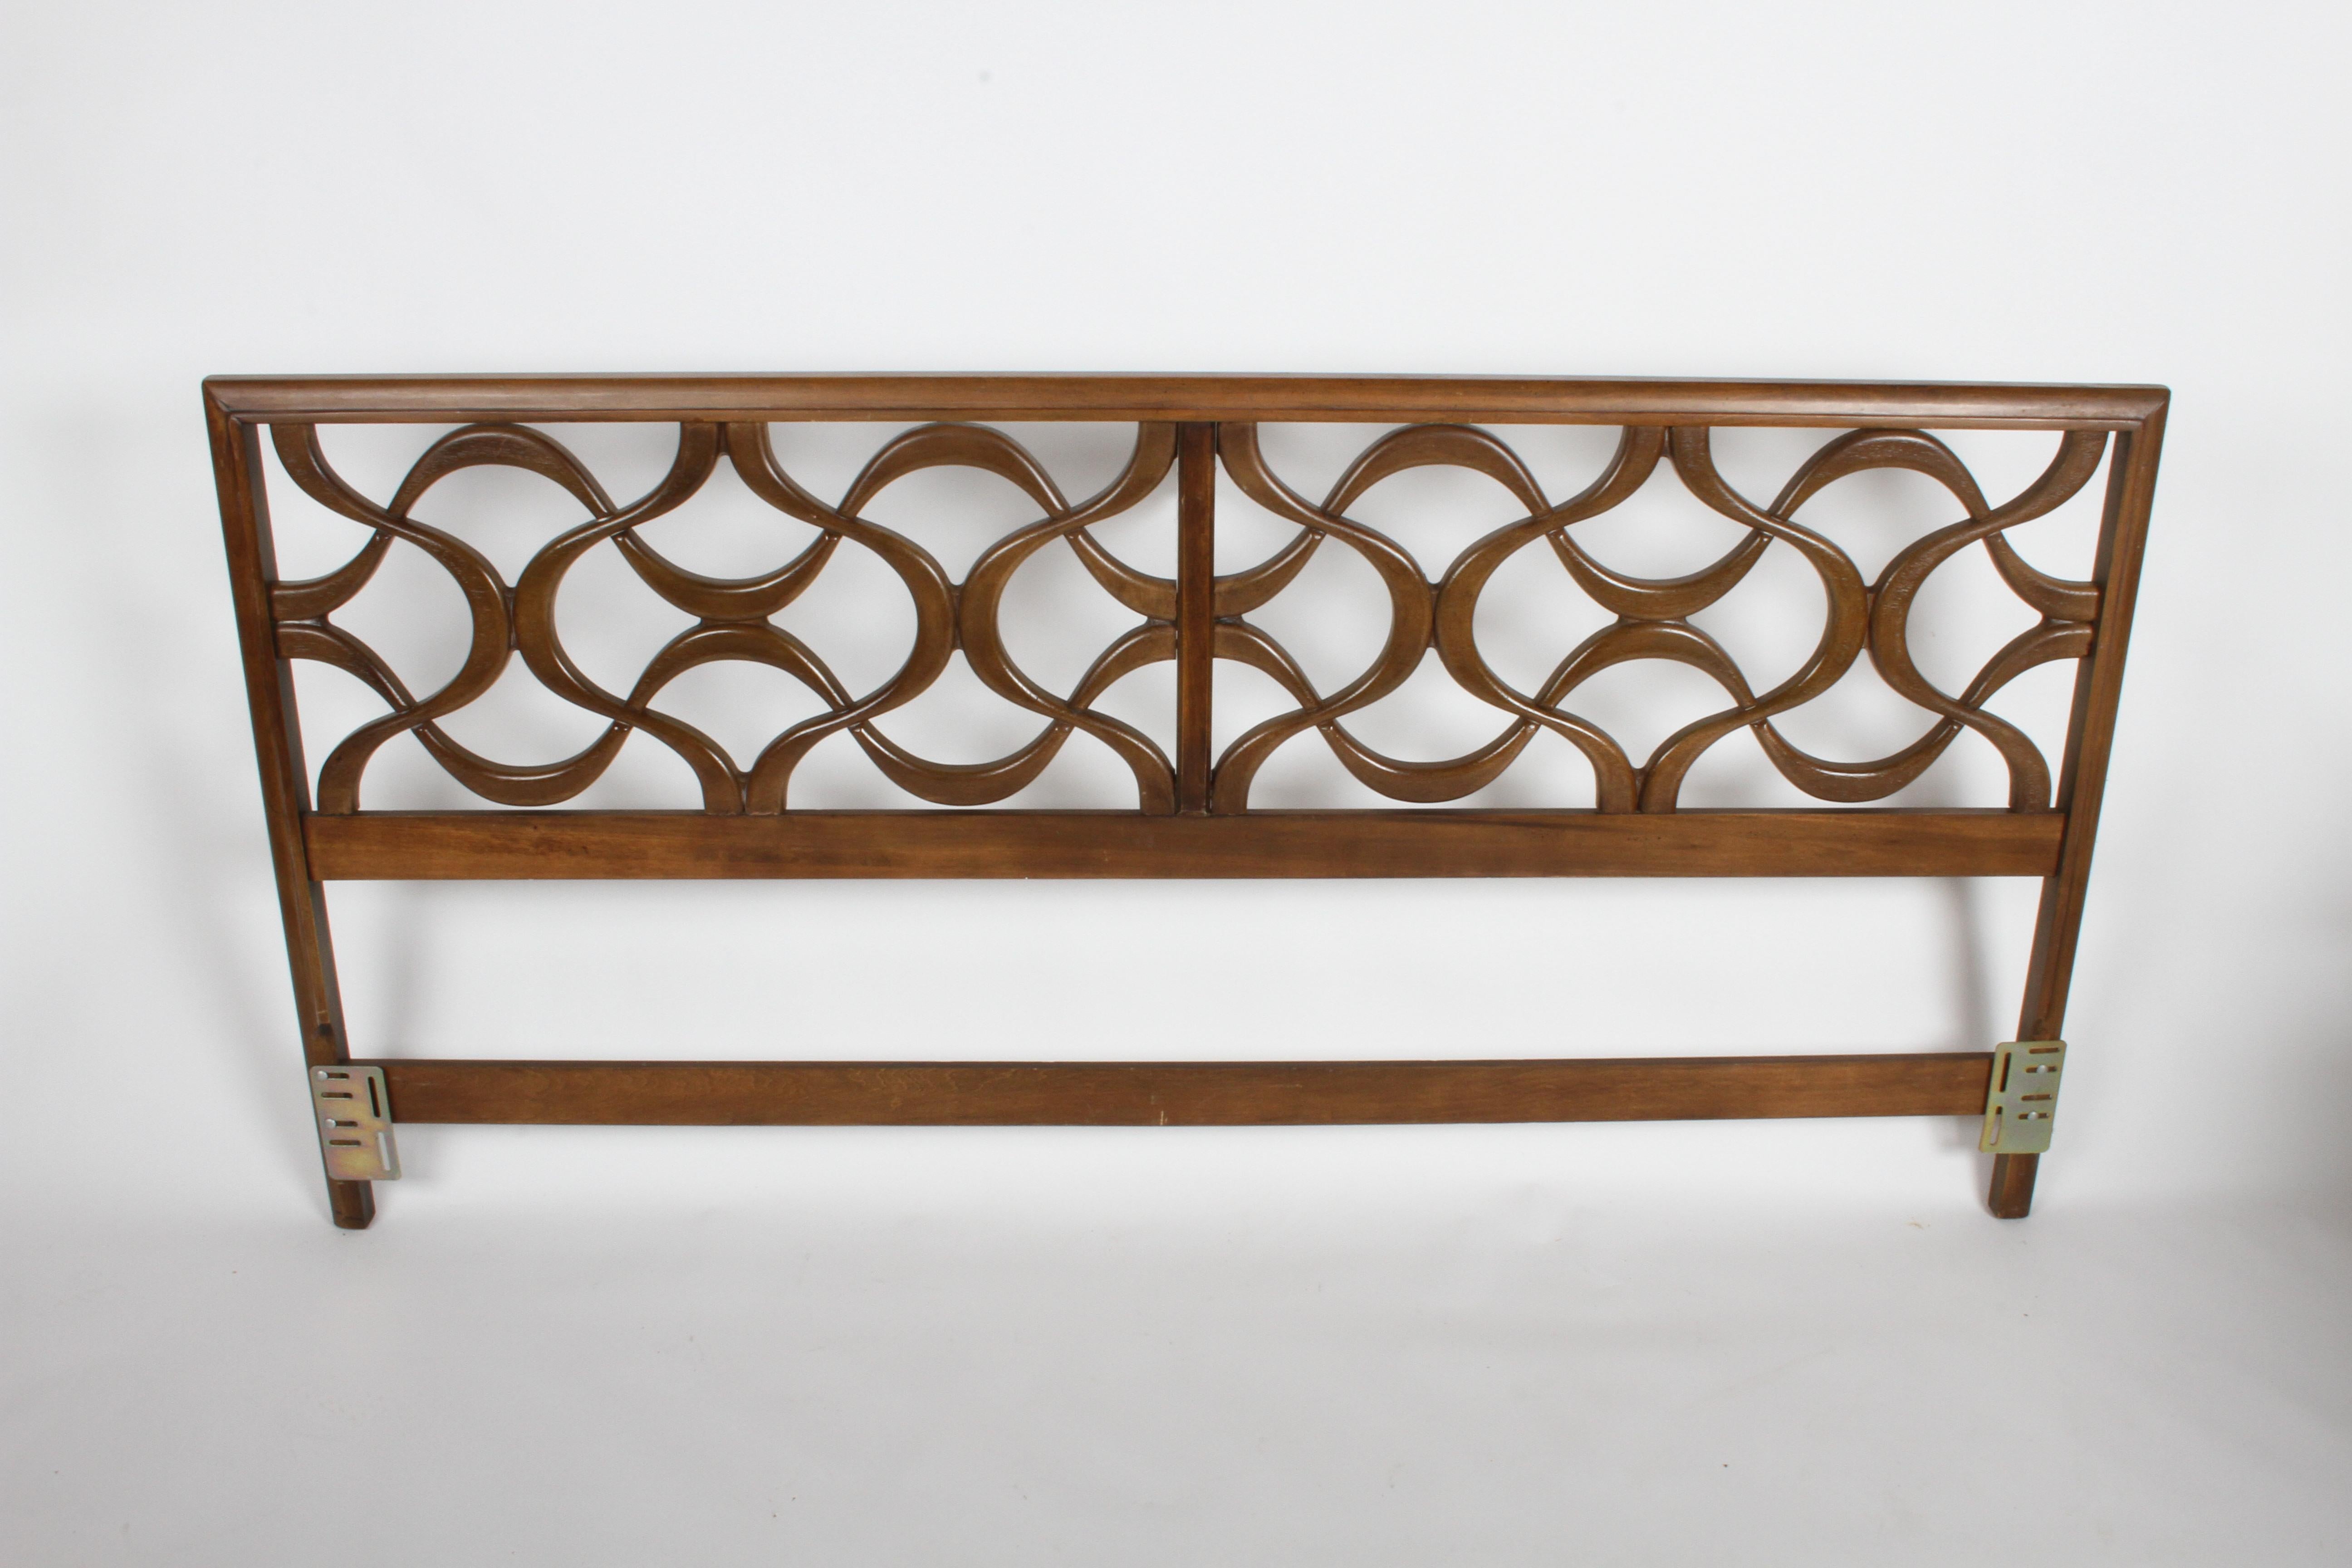 In the style of Erwin Hauer Continua series, sculptural interlocking geometric form king size headboard in original medium pecan finish. The sculptural interlocking hourglass forms are made of a resin composite, framed by walnut. Headboard will be